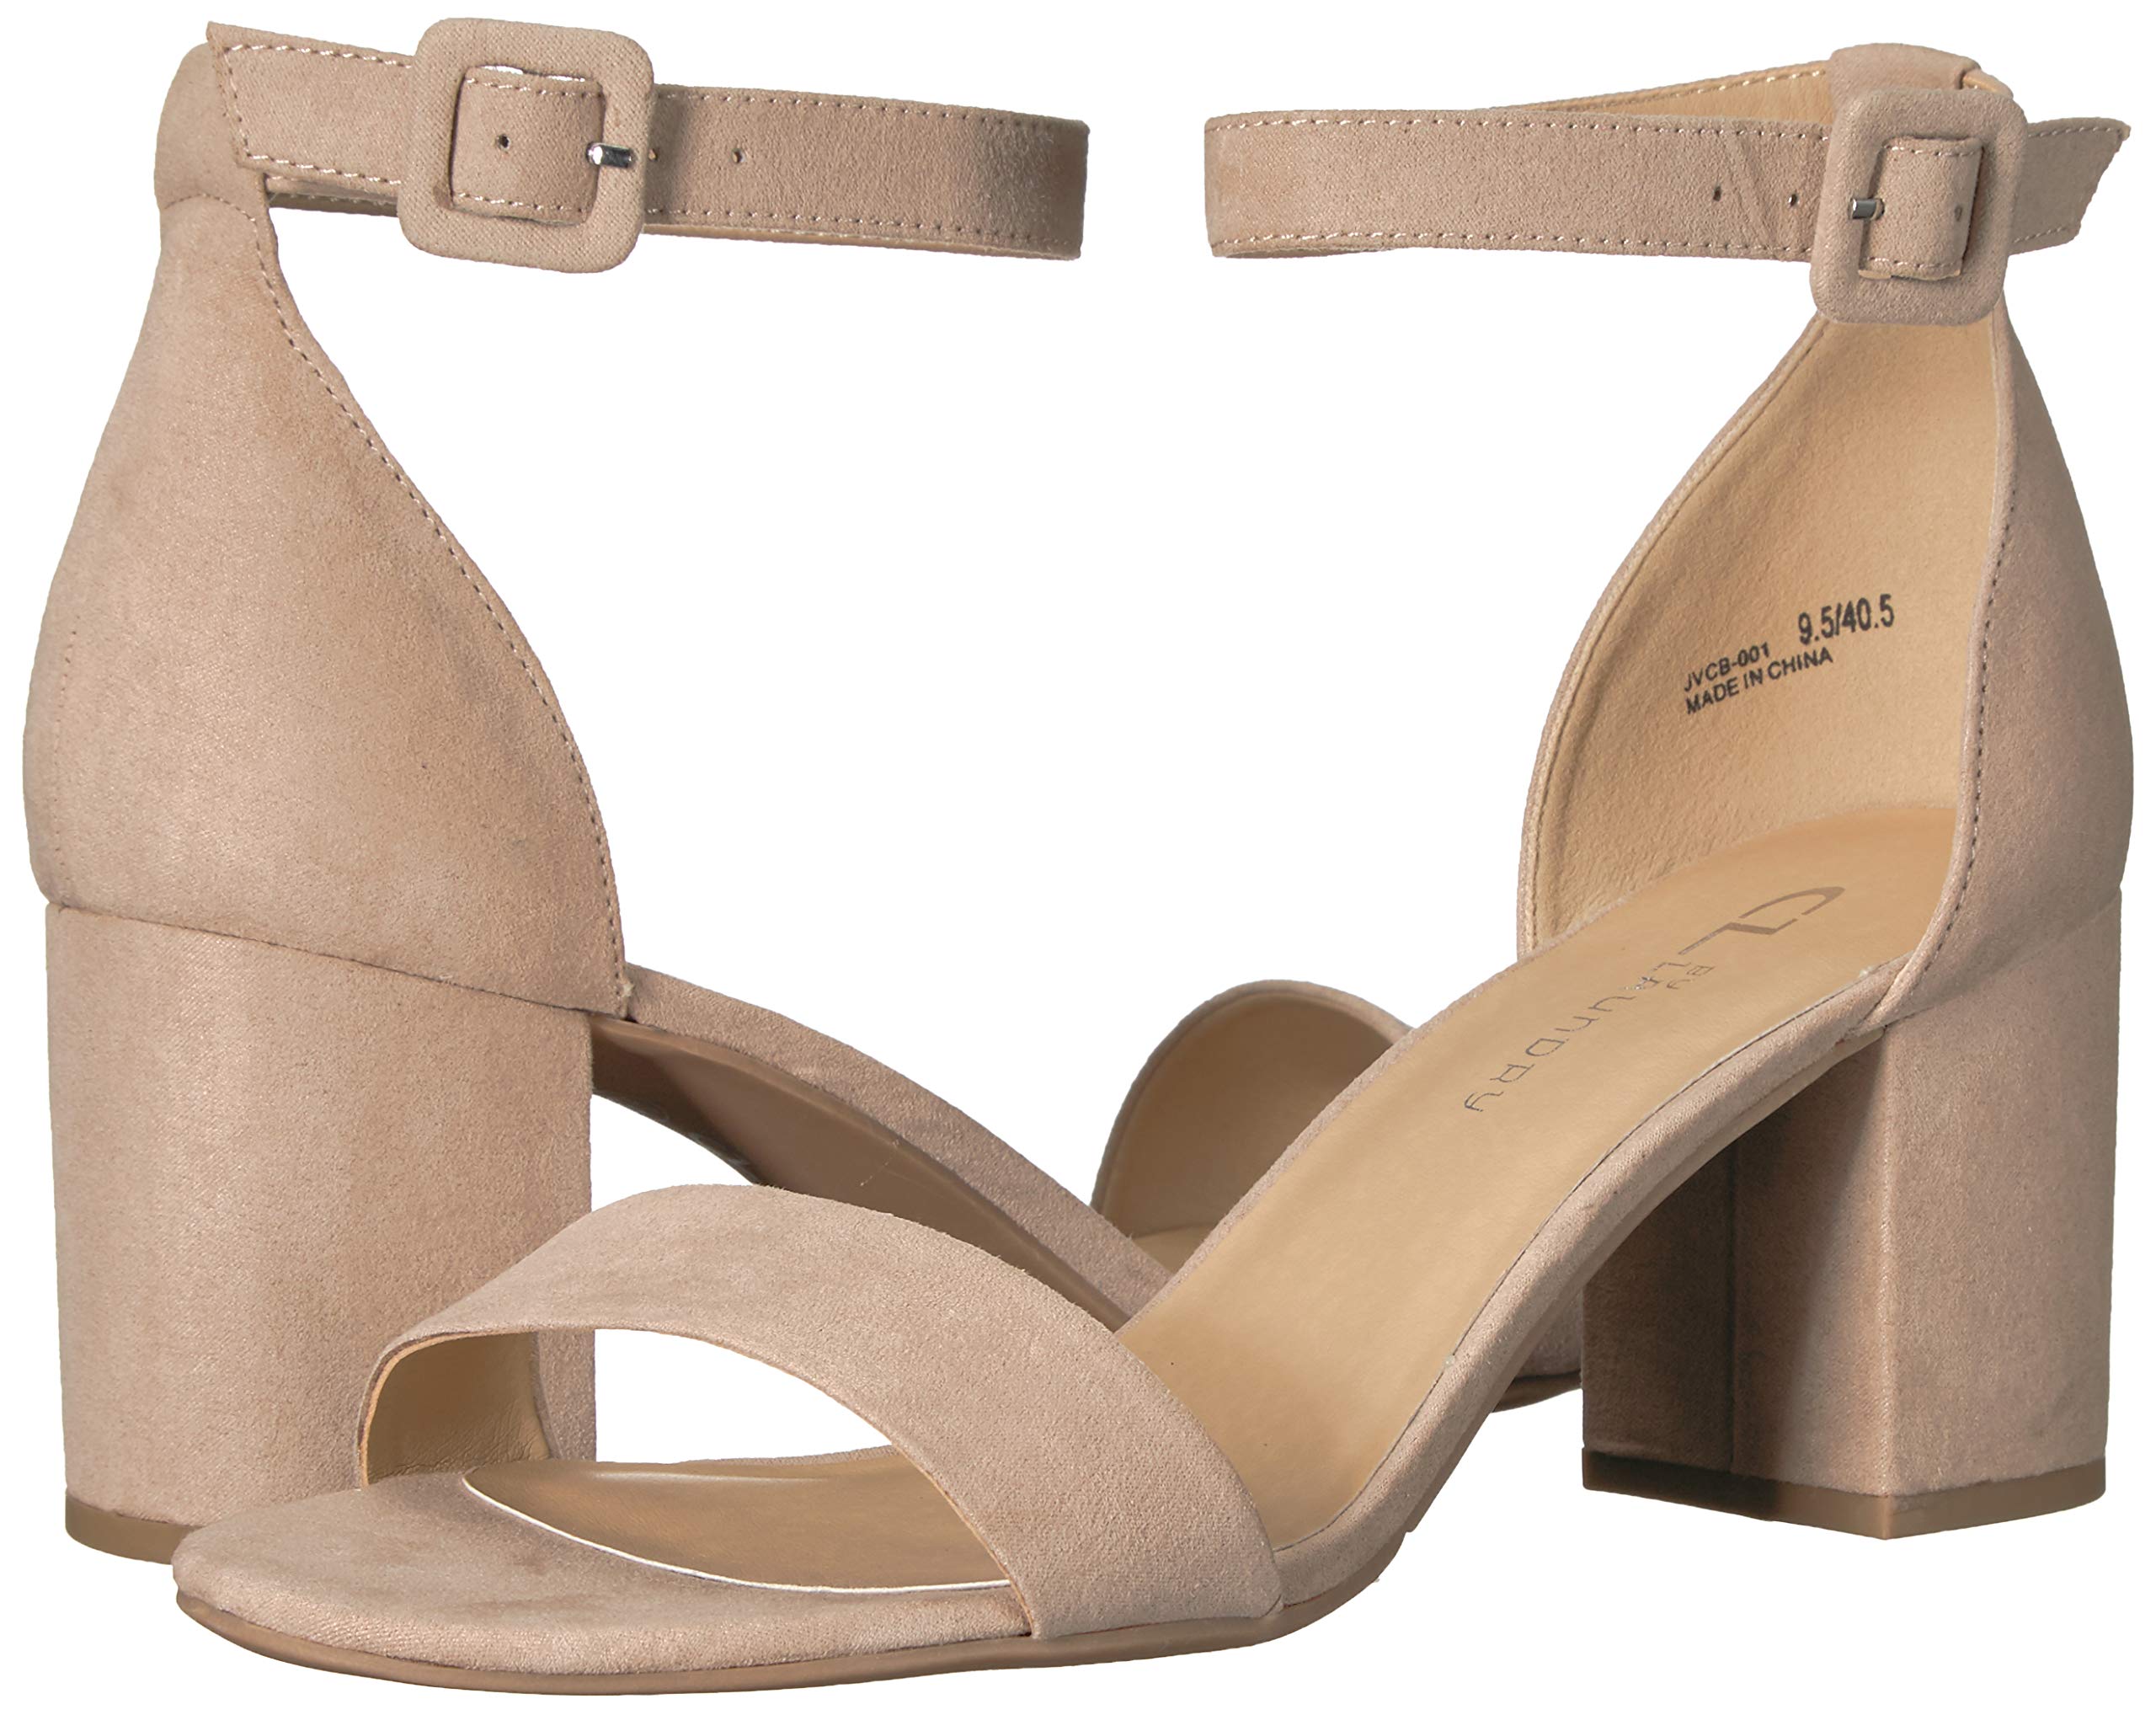 CL by Chinese Laundry Women's Jody Heeled Sandal